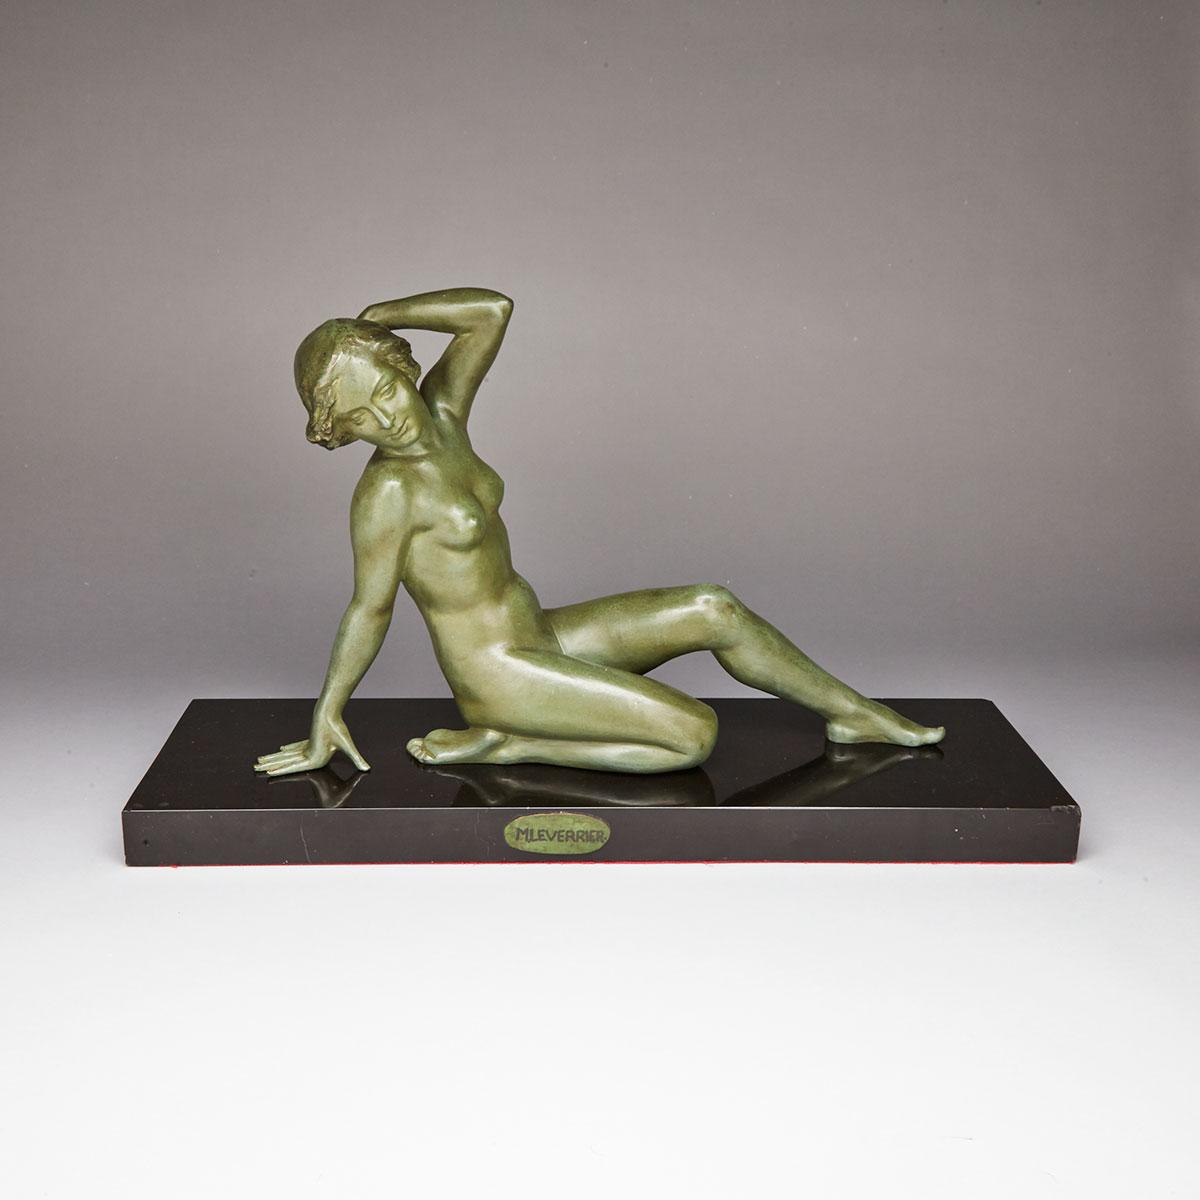 French Art deco patinated bronze figure of a reclining nude, mid 20th century